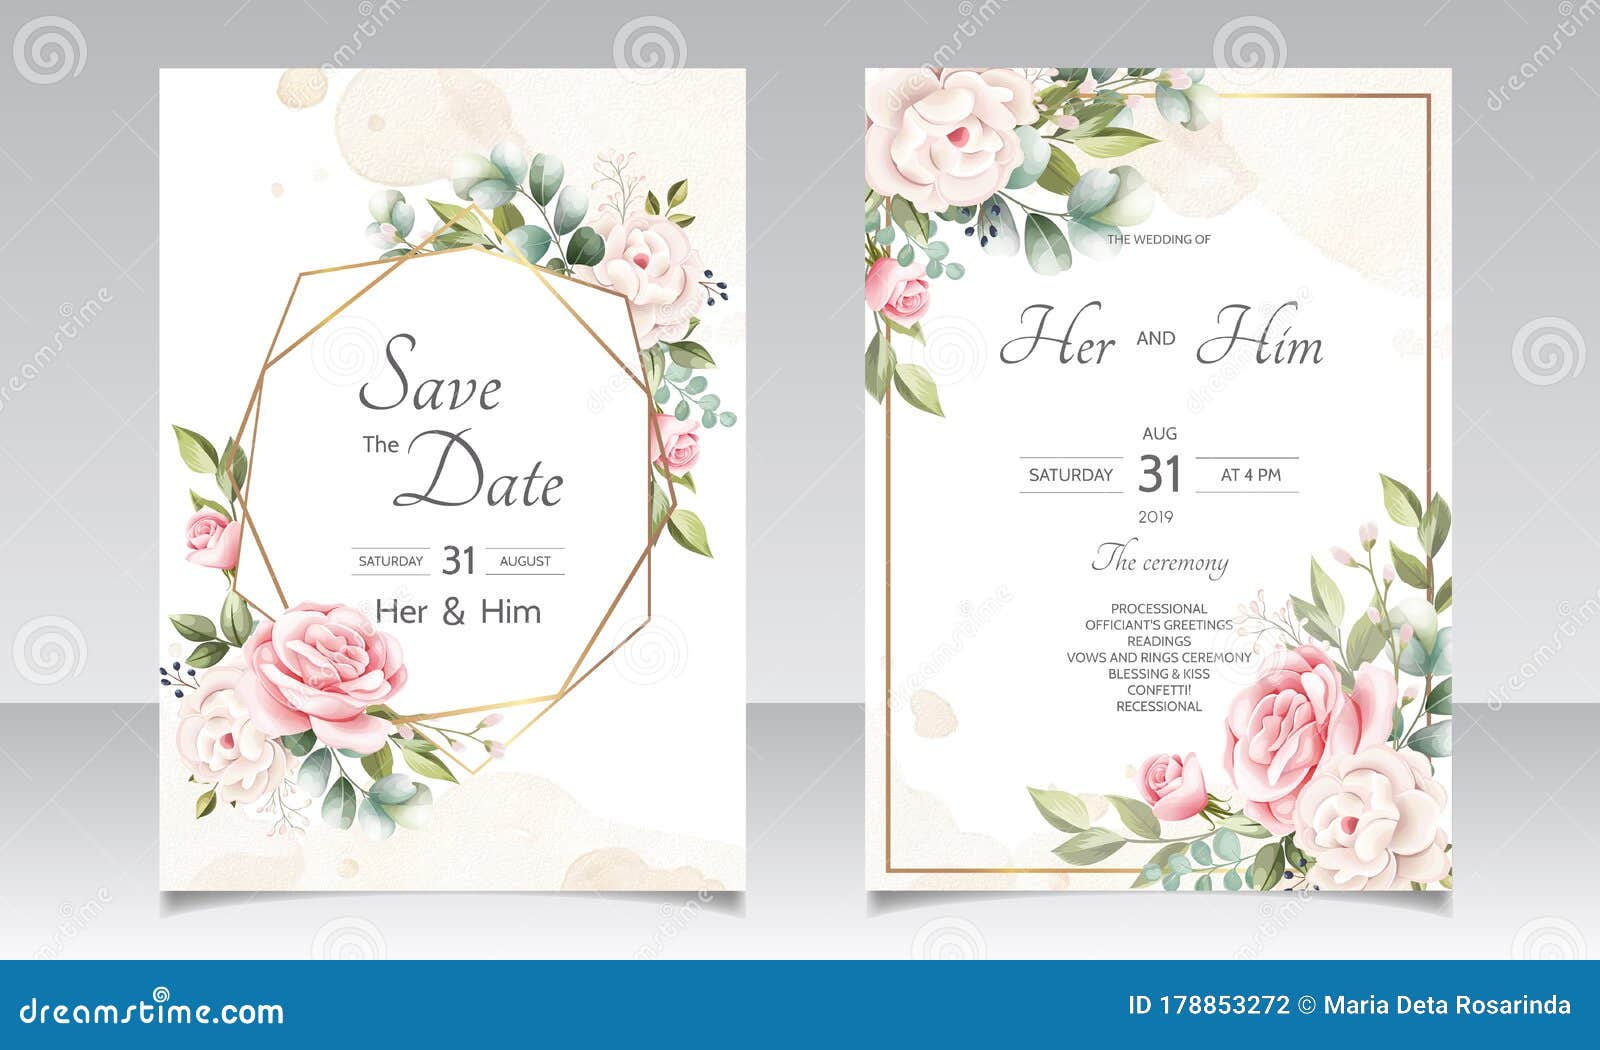 Wedding invitation card template set with beautiful floral leave